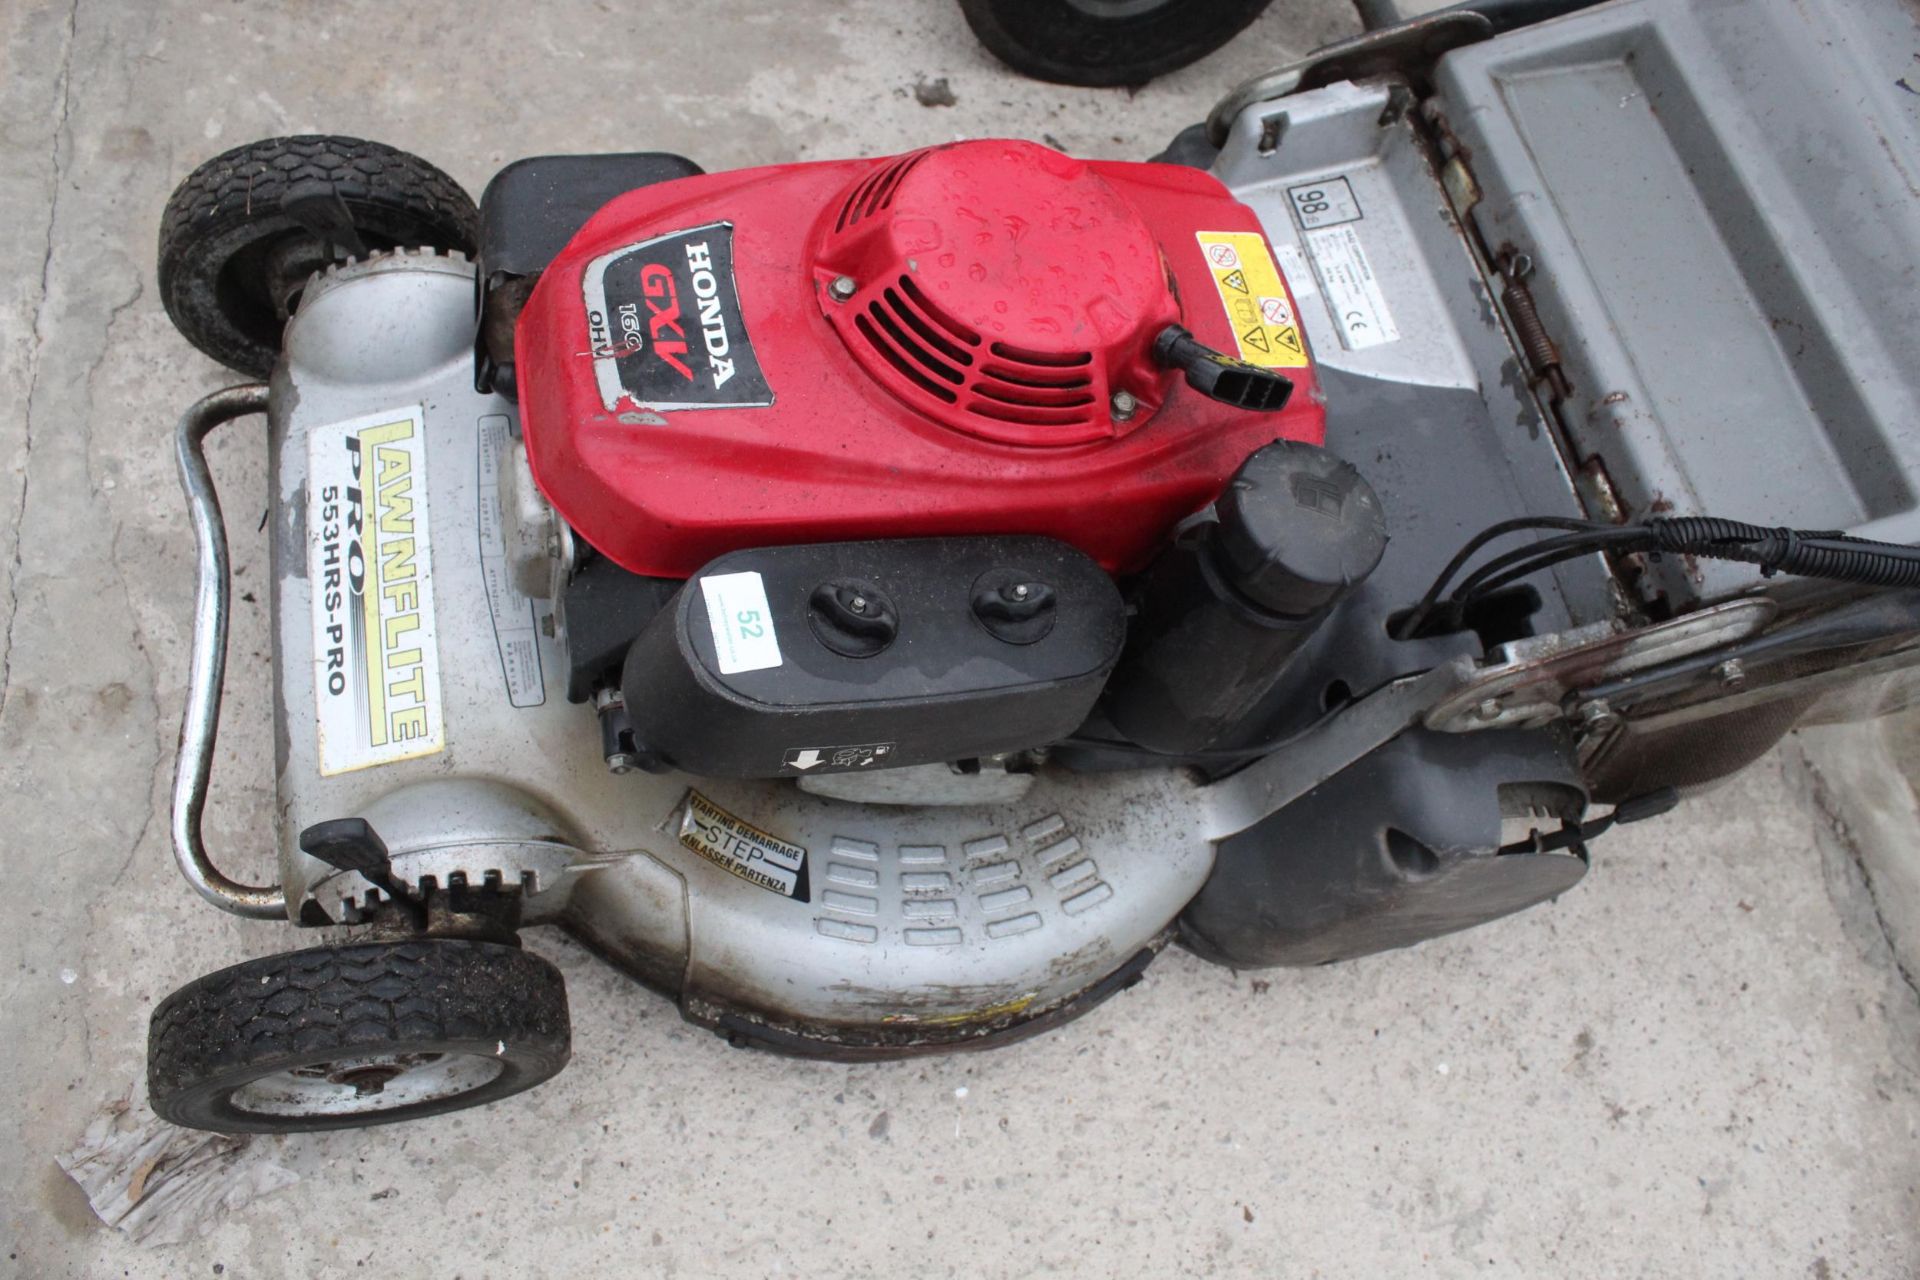 LAWNFLITE PRO REAR ROLLER SELF PROPELLED MOWER. GOOD WORKING ORDER. RECENTLY SERVICED. ONLY FOR SALE - Image 2 of 2